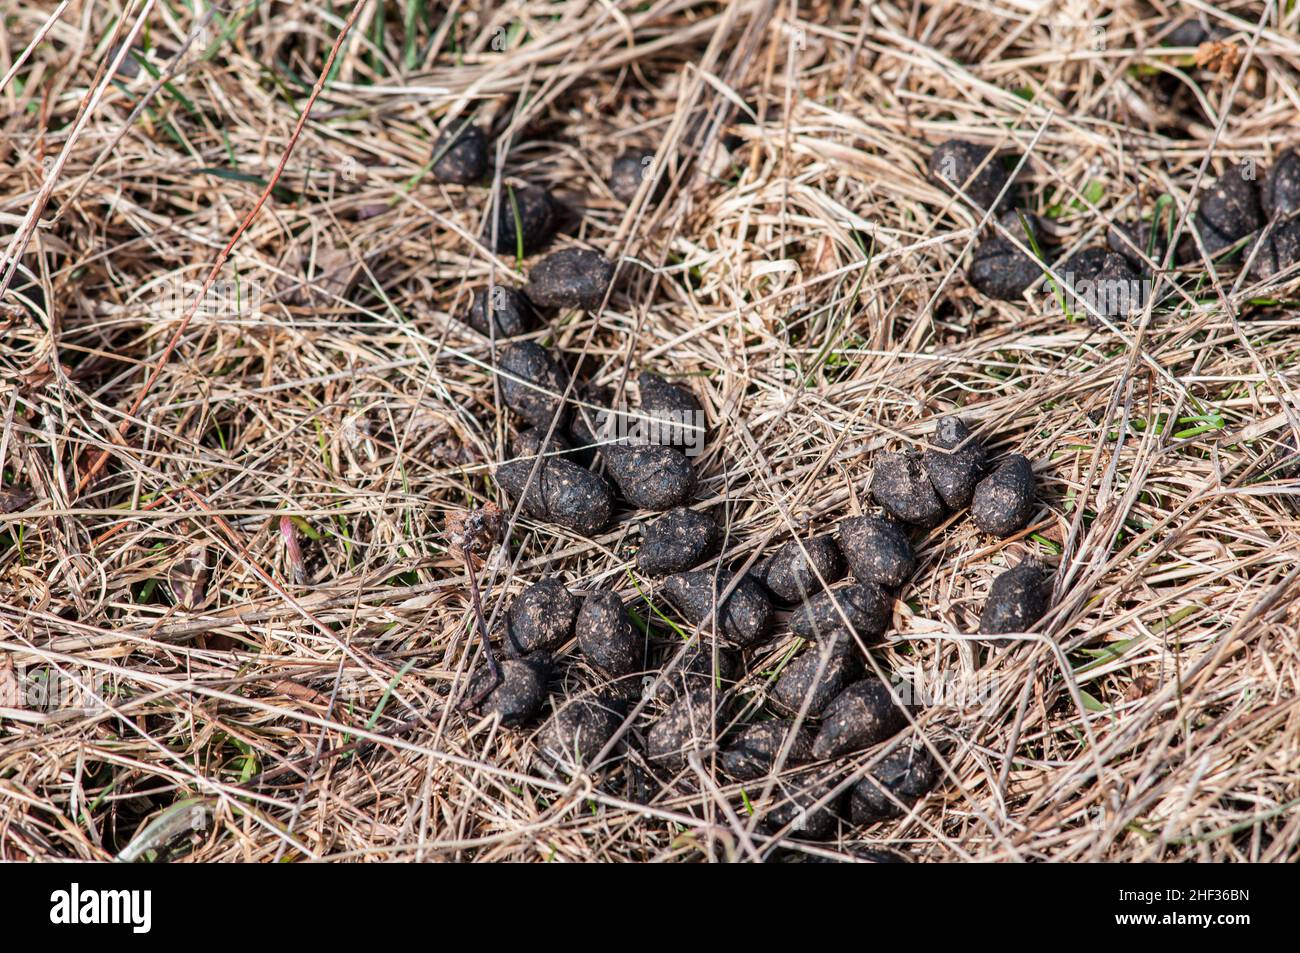 White Tailed Deer (Odocoileus virginianus) droppings in dried grass, Shenandoah National Park. Stock Photo